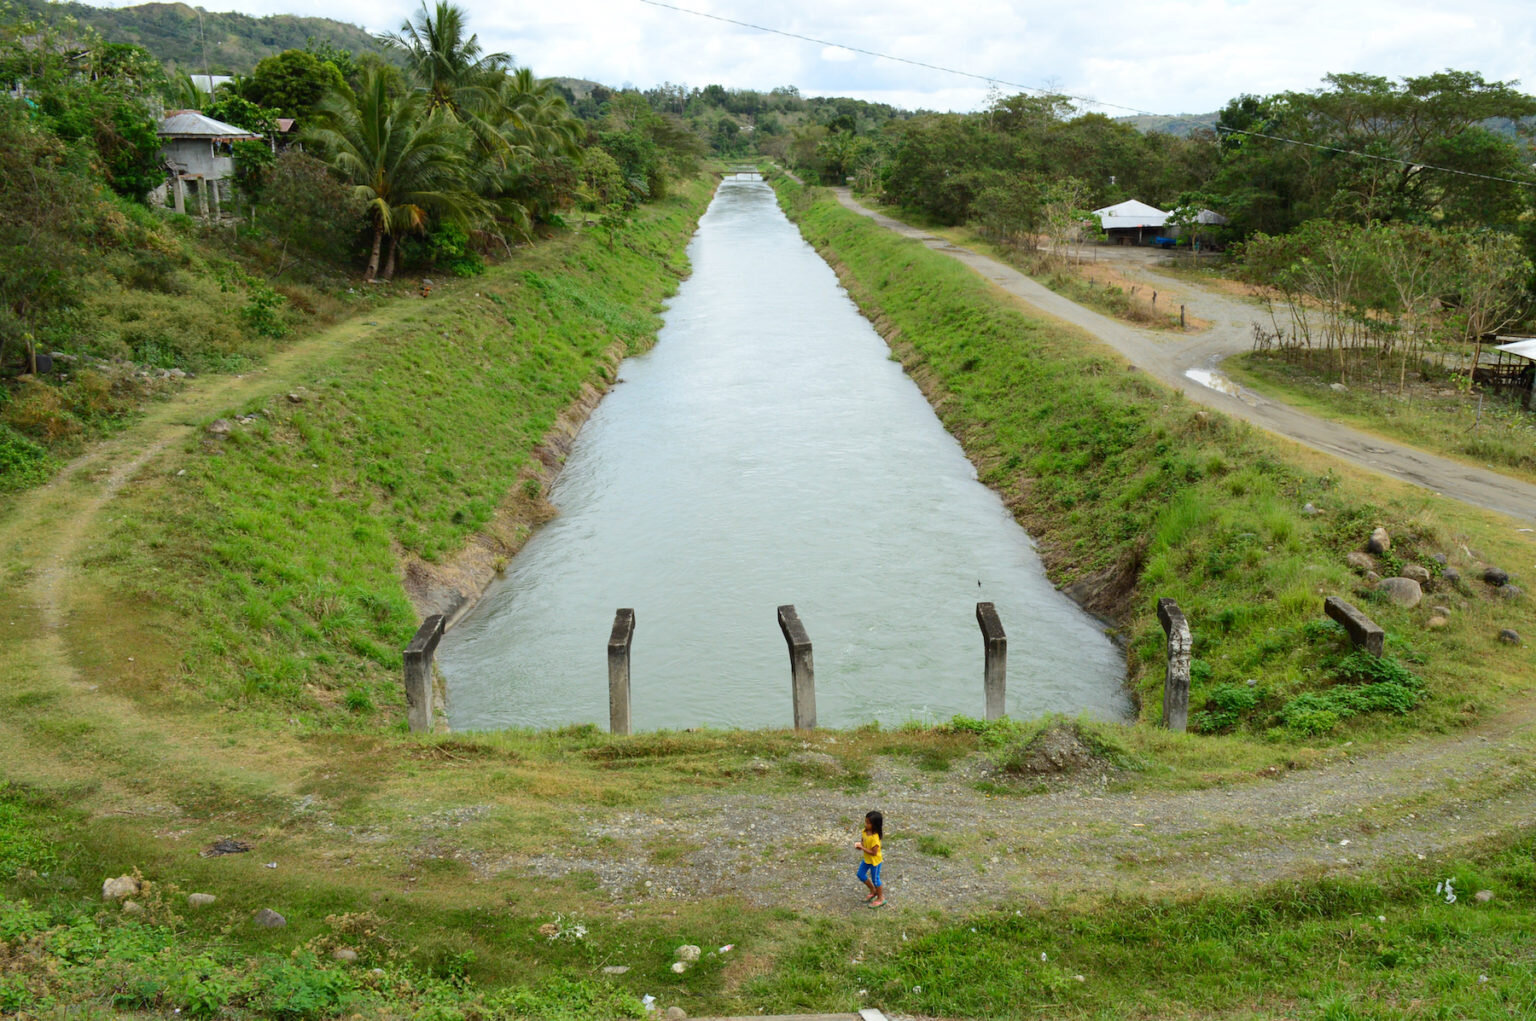 The main canal of the Upper Chico River Irrigation System in Tabuk, Kalinga. Image by Karlston Lapniten for Mongabay